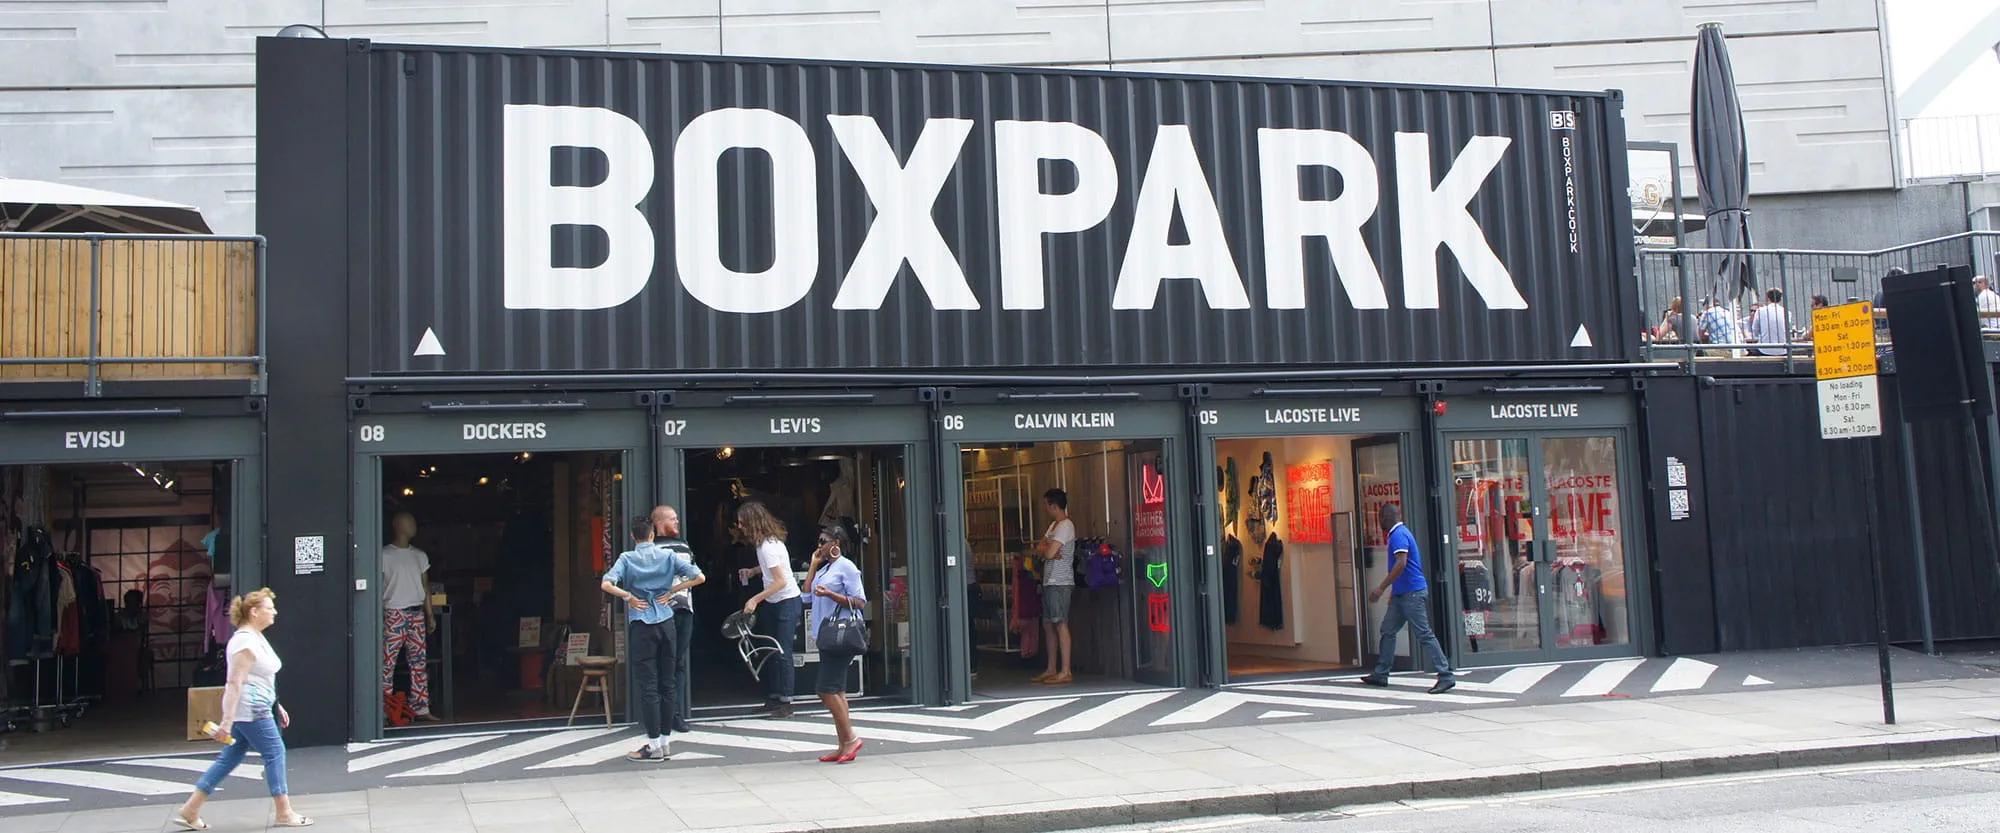 'Boxpark' - a temporary shopping area in London's Shoreditch constructed from shipping containers, or 'boxes'